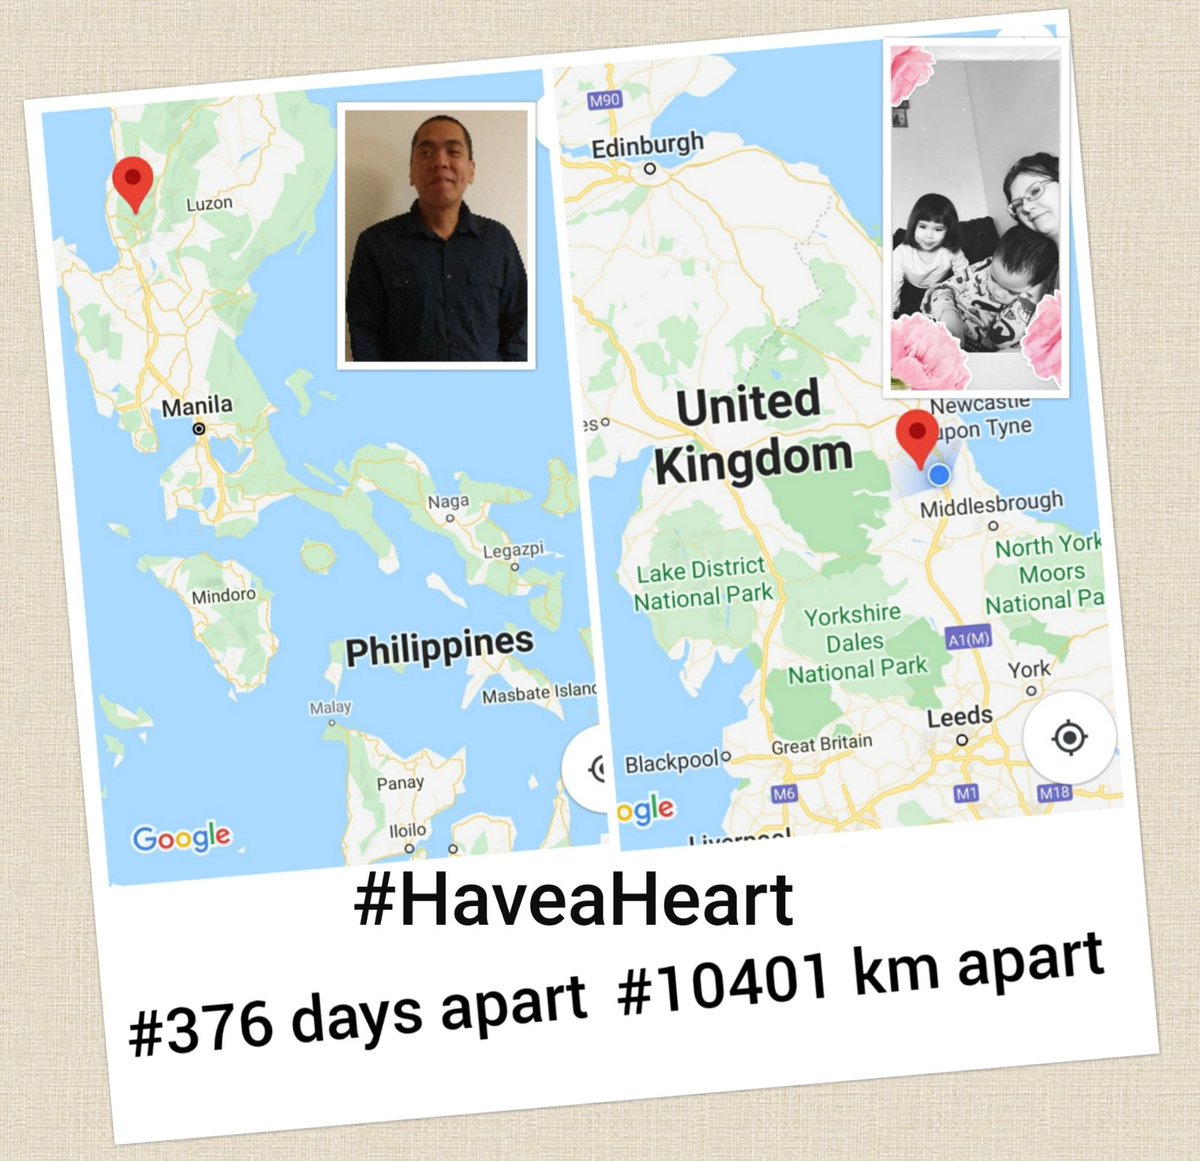 Rose's are red, 
violets are blue, 
For 376 days
I was separated from you

#HaveaHeart #priceonlove

@BorisJohnson @patel4witham @marykfoy @ukhomeoffice @jeremycorbyn @thom_brooks @Keir_Starmer @RLong_Bailey @loosewomen @LBC @guardian @ReuniteDivFamil